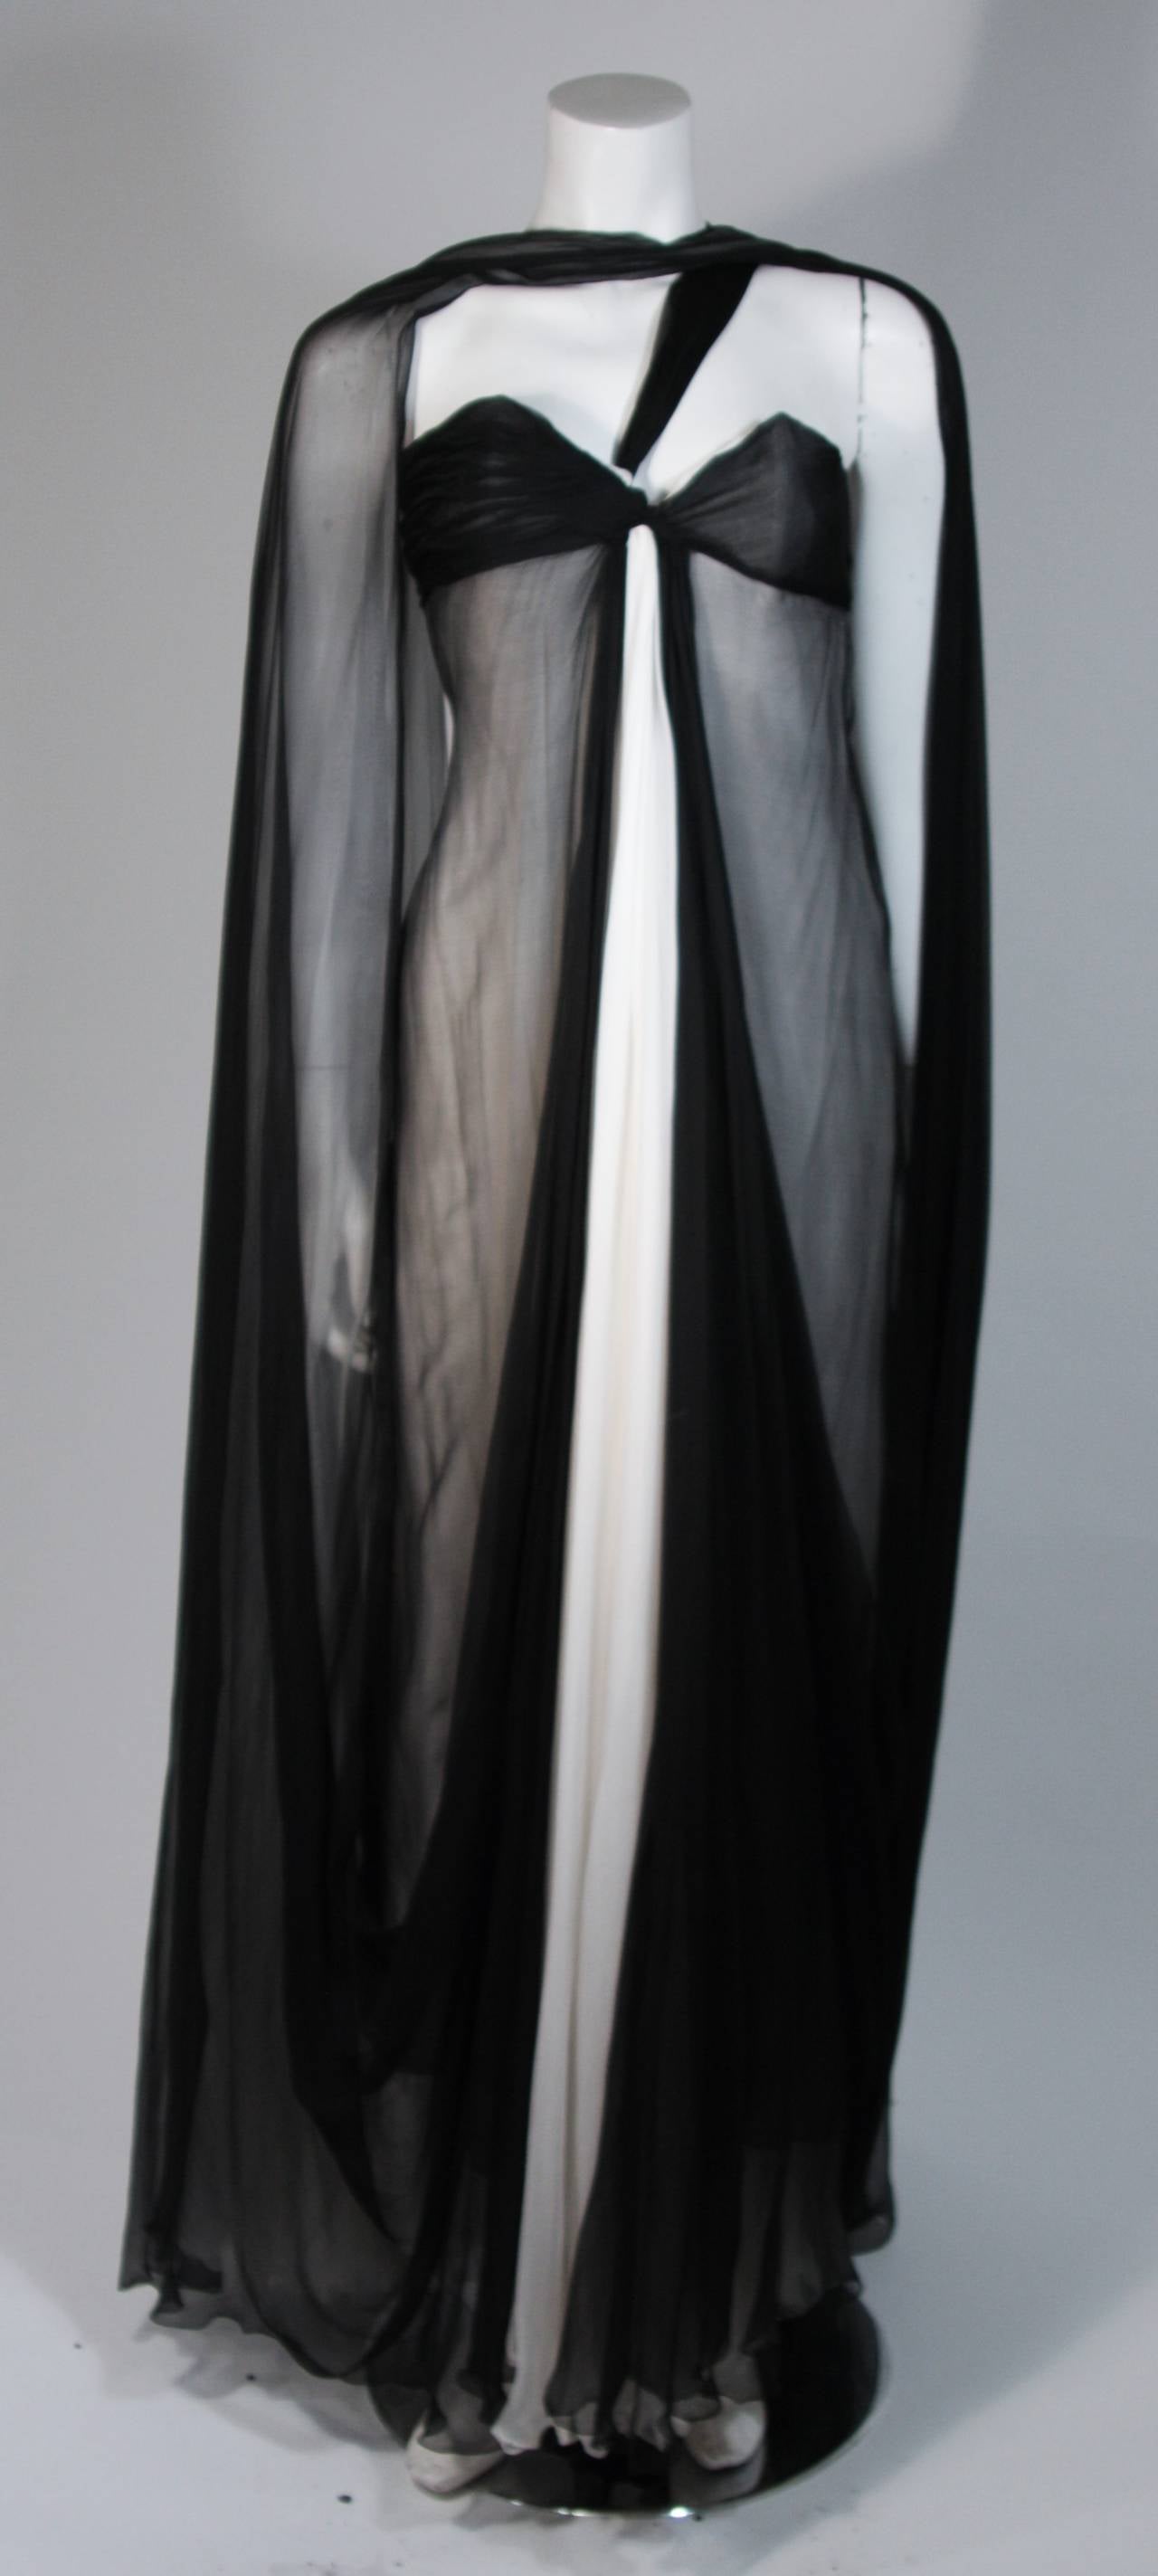 This Jacqueline De Ribes gown is composed of black and ivory silk chiffon. The gown features draping which can be styled and worn to your liking (see variations in photographs). There is a center back zipper and boned foundation. Made in France. In